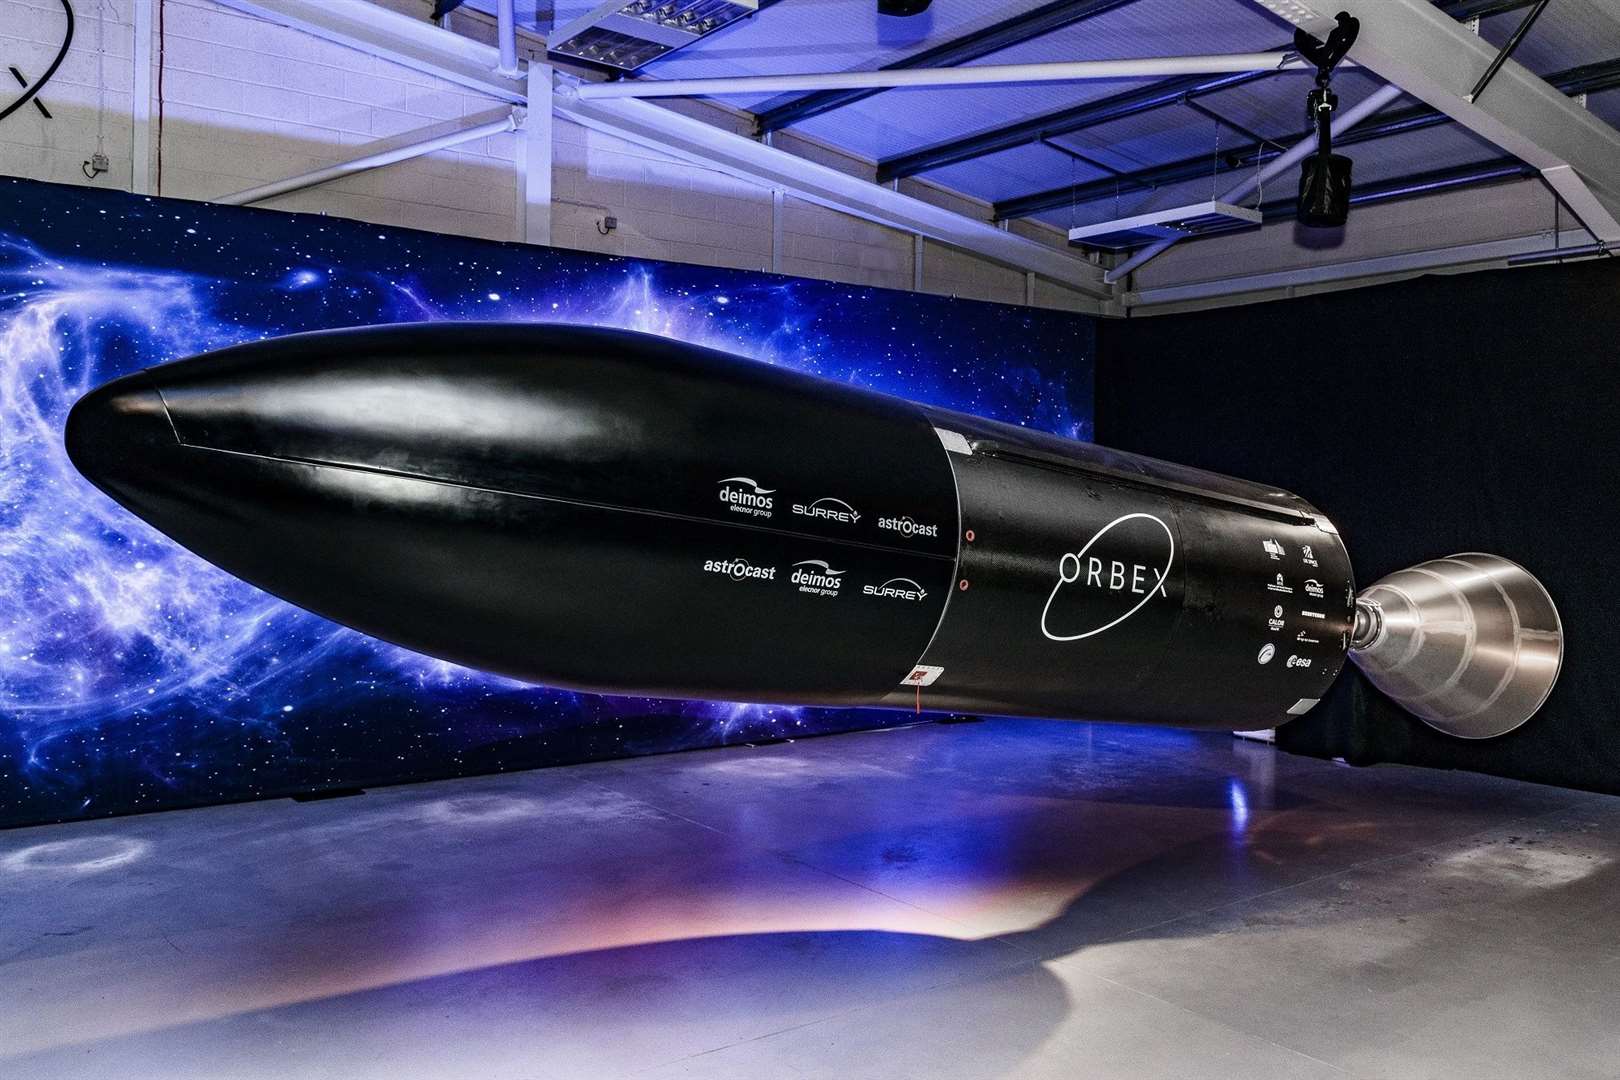 The Orbex Prime launch vehicle. Picture: Orbex